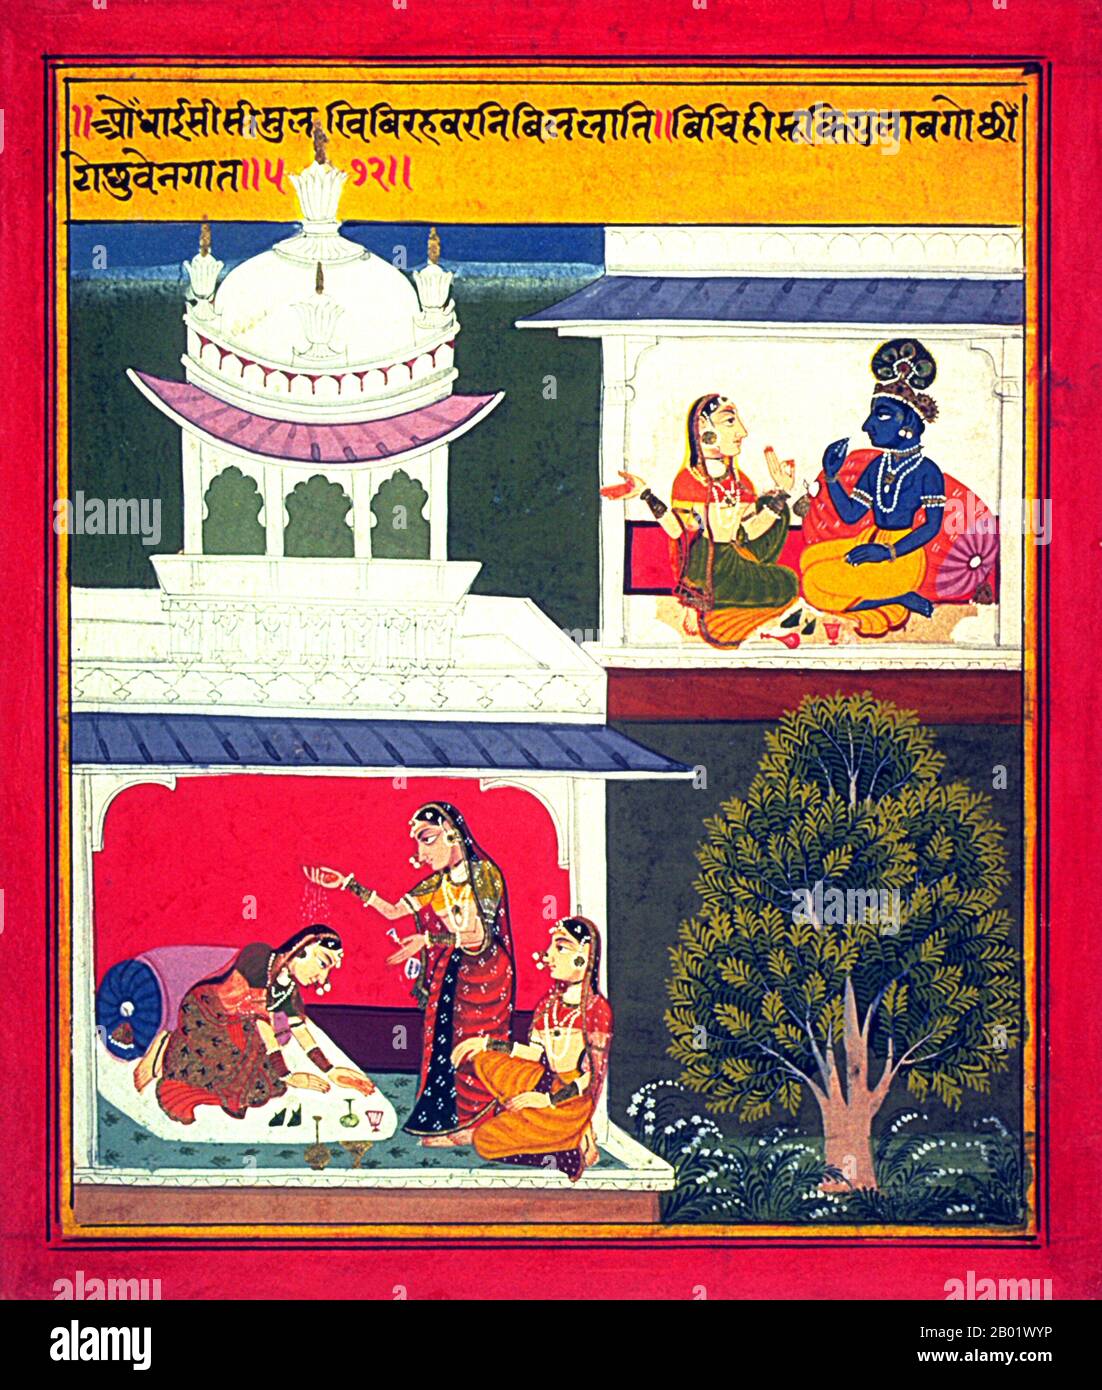 In the upper part of the painting an intermediary companion of Radha visits Krishna (blue) to tell him of Radha's longing for him and desire to be reunited. In the lower part of the painting a flask of rosewater is poured onto Radha to cool the burning pain of her separation from Krishna.  The text describes the scene and has been translated as: 'Hearing her moan with the burning pin of separation, I emptied a whole flask of rosewater onto her, but the flames of parting vaporised the rose water in mid air, and not a drop fell on her' (Radha's companion and internmediary reporting to Krishna). Stock Photo